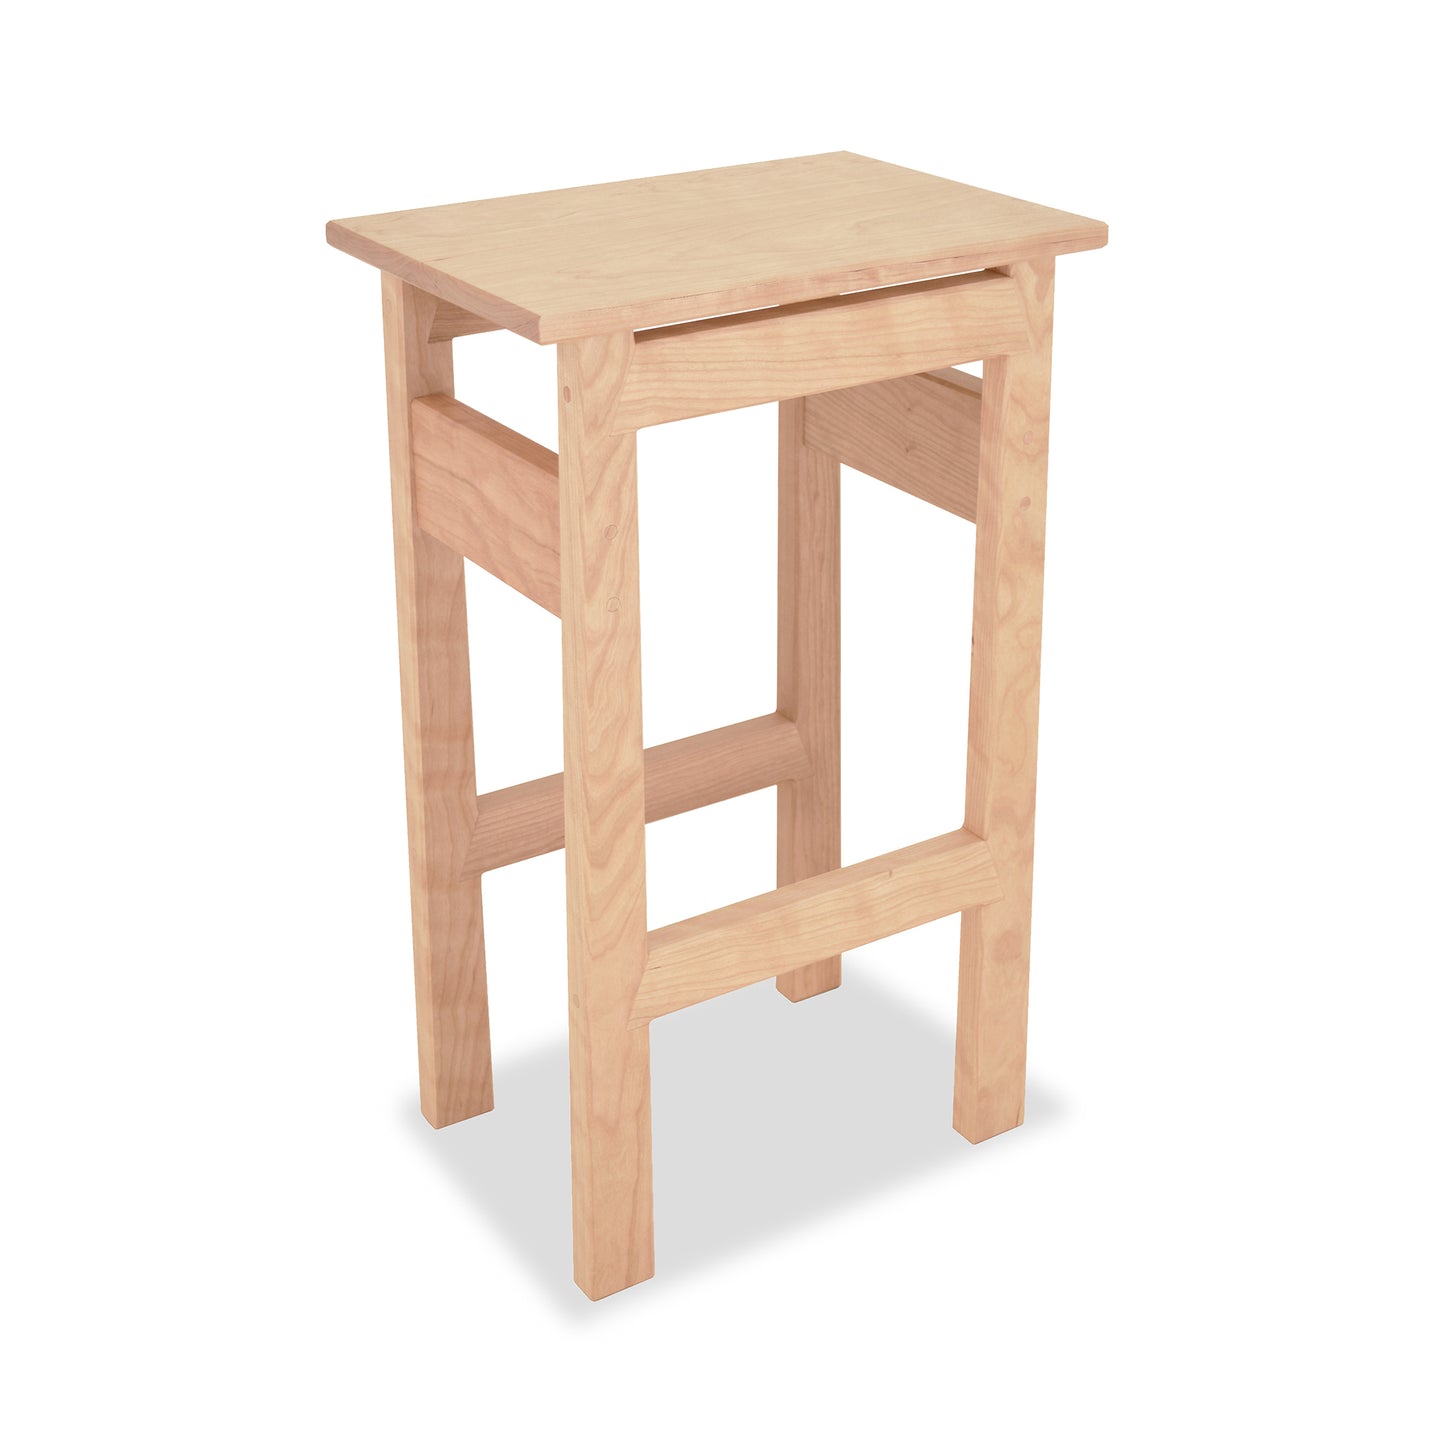 A simple eco-friendly Contemporary Asian Stool from Maple Corner Woodworks, isolated on a white background.